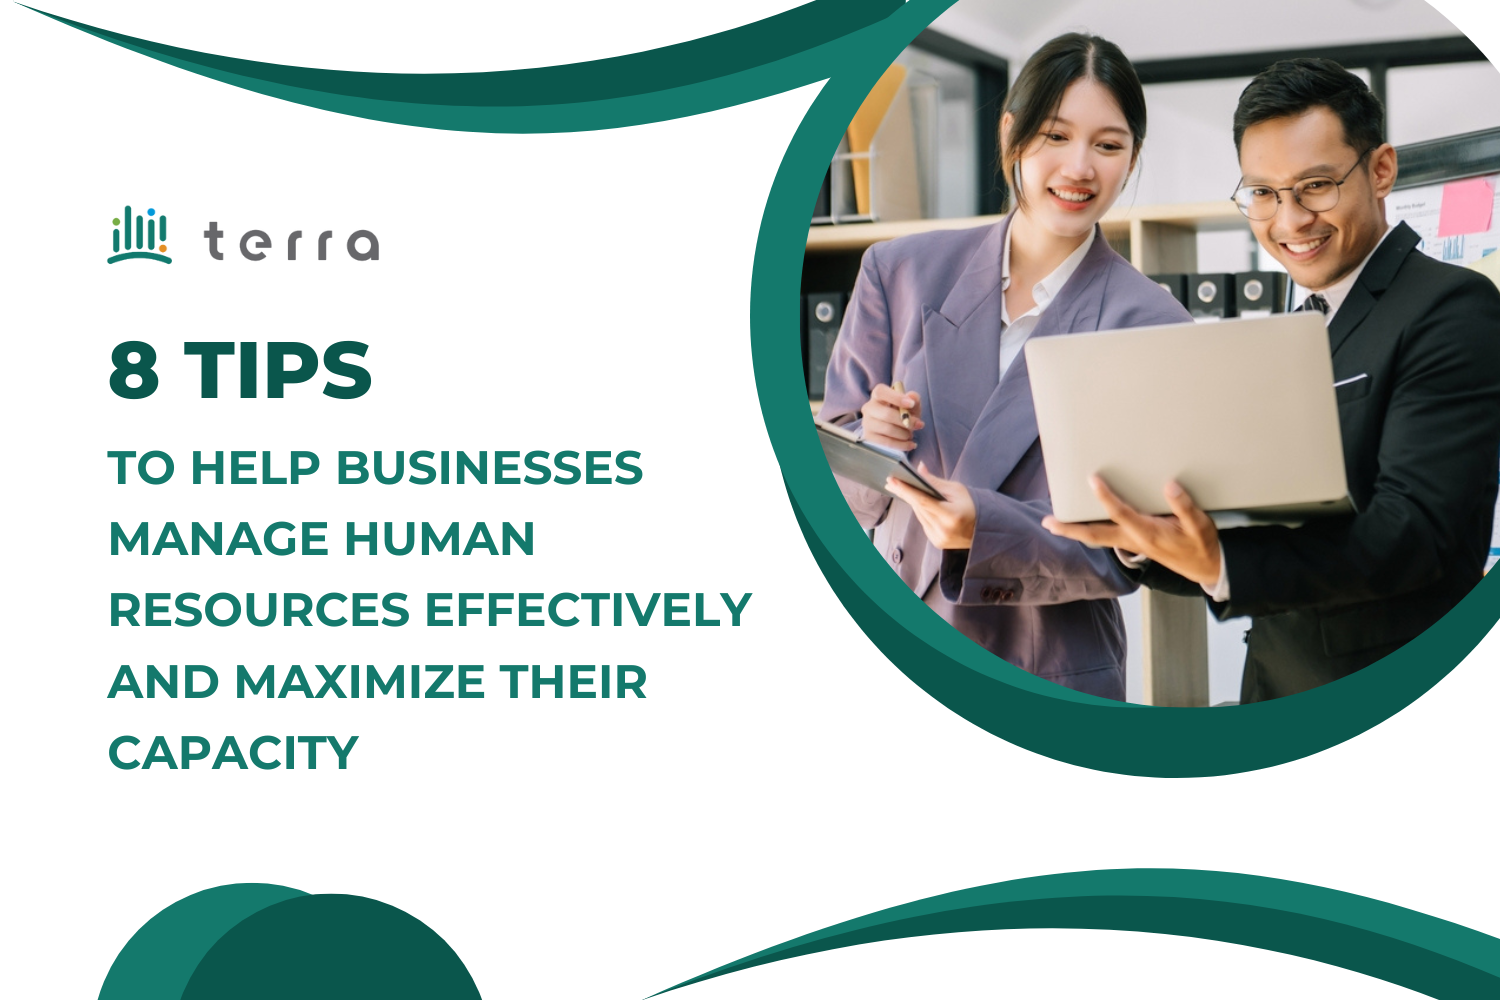 8 tips to help businesses manage employees effectively and maximize their capacity